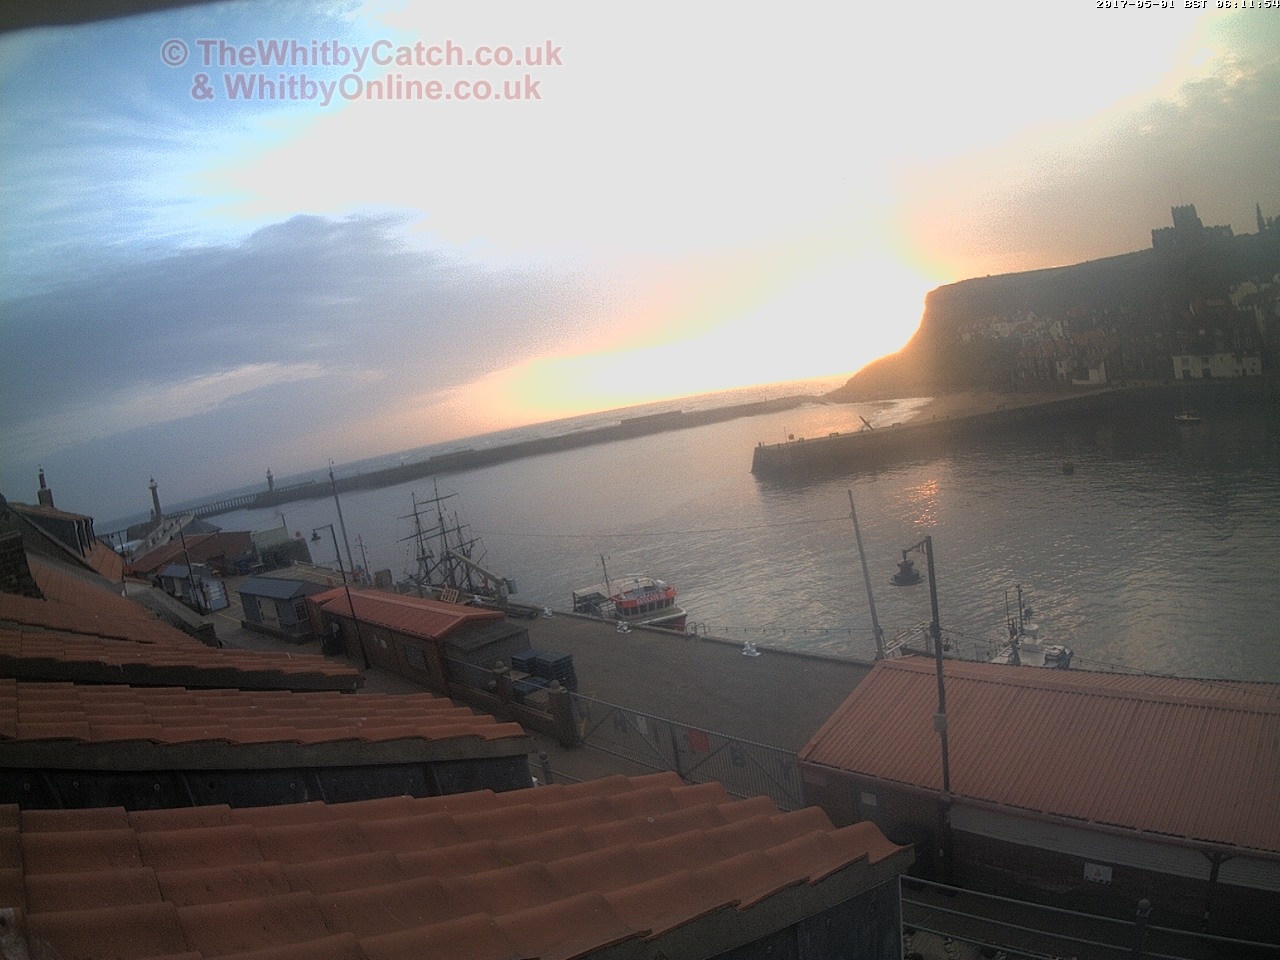 Whitby Mon 1st May 2017 06:12.